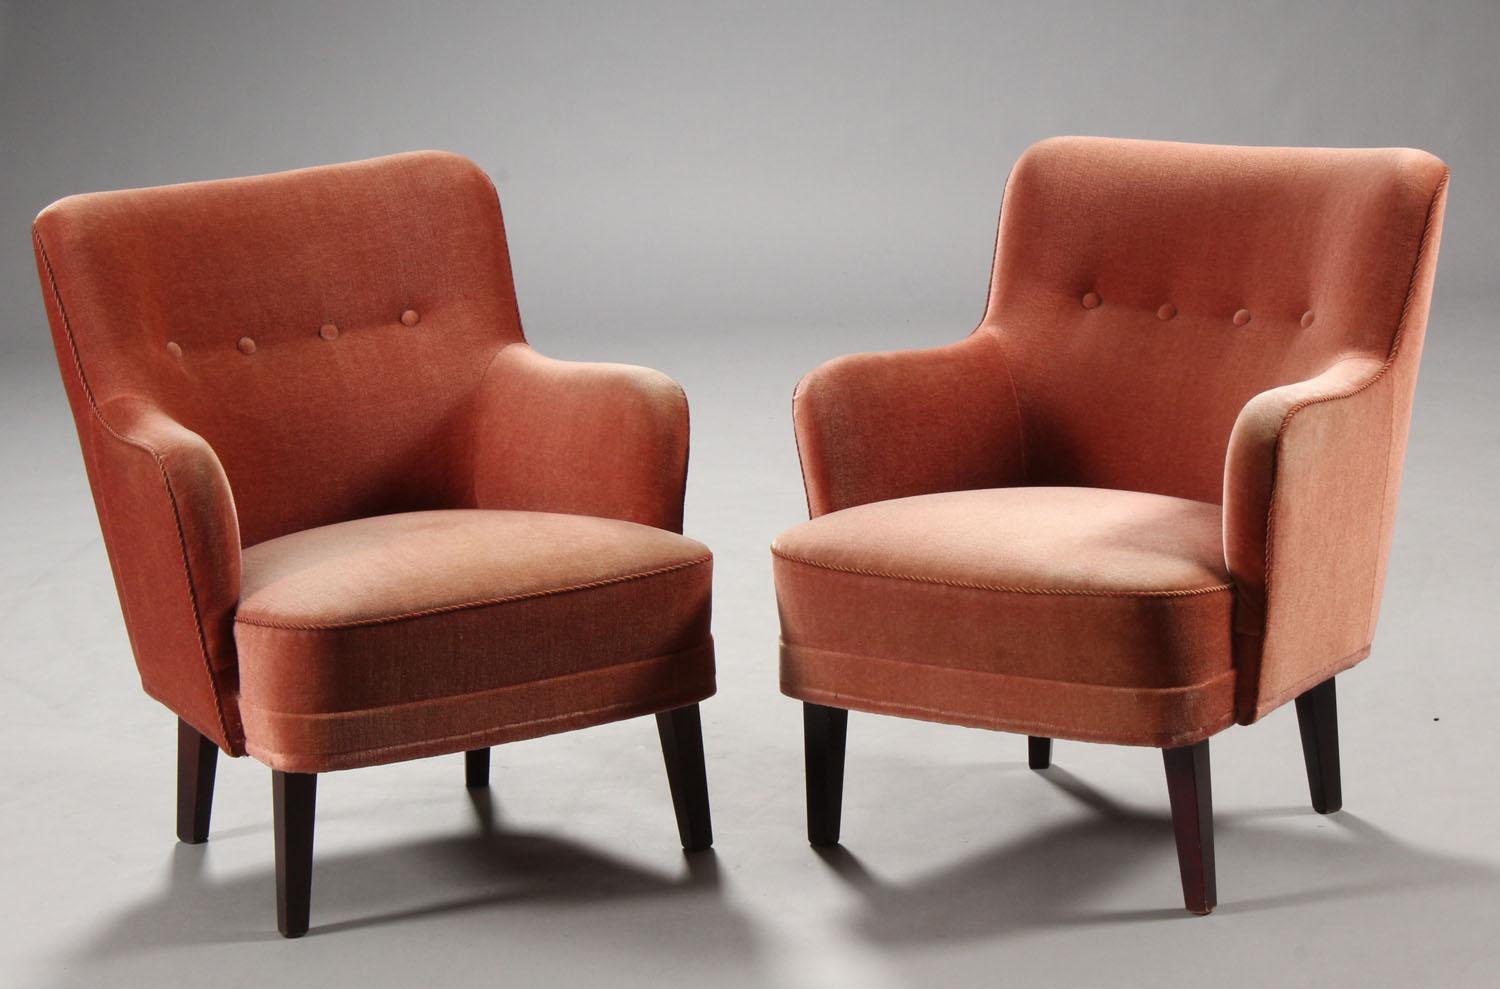 Pair of comfortable and stylish Danish modern small armchairs upholstered in rose-colored buttoned velour, tapered legs of stained beechwood. Perfect for a lounge or bedroom.